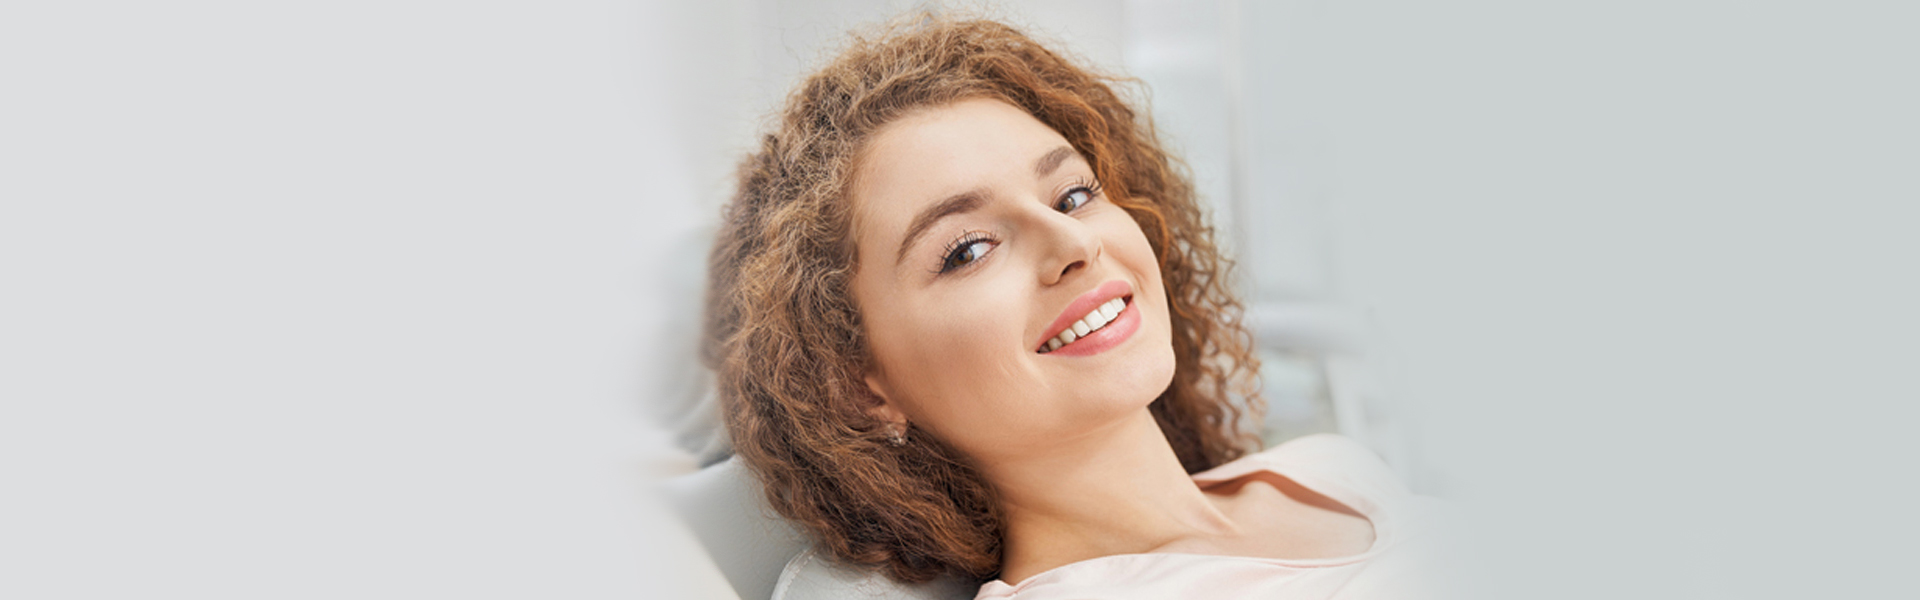 Common Dental Crown Concerns: Pro Tips for Peace of Mind